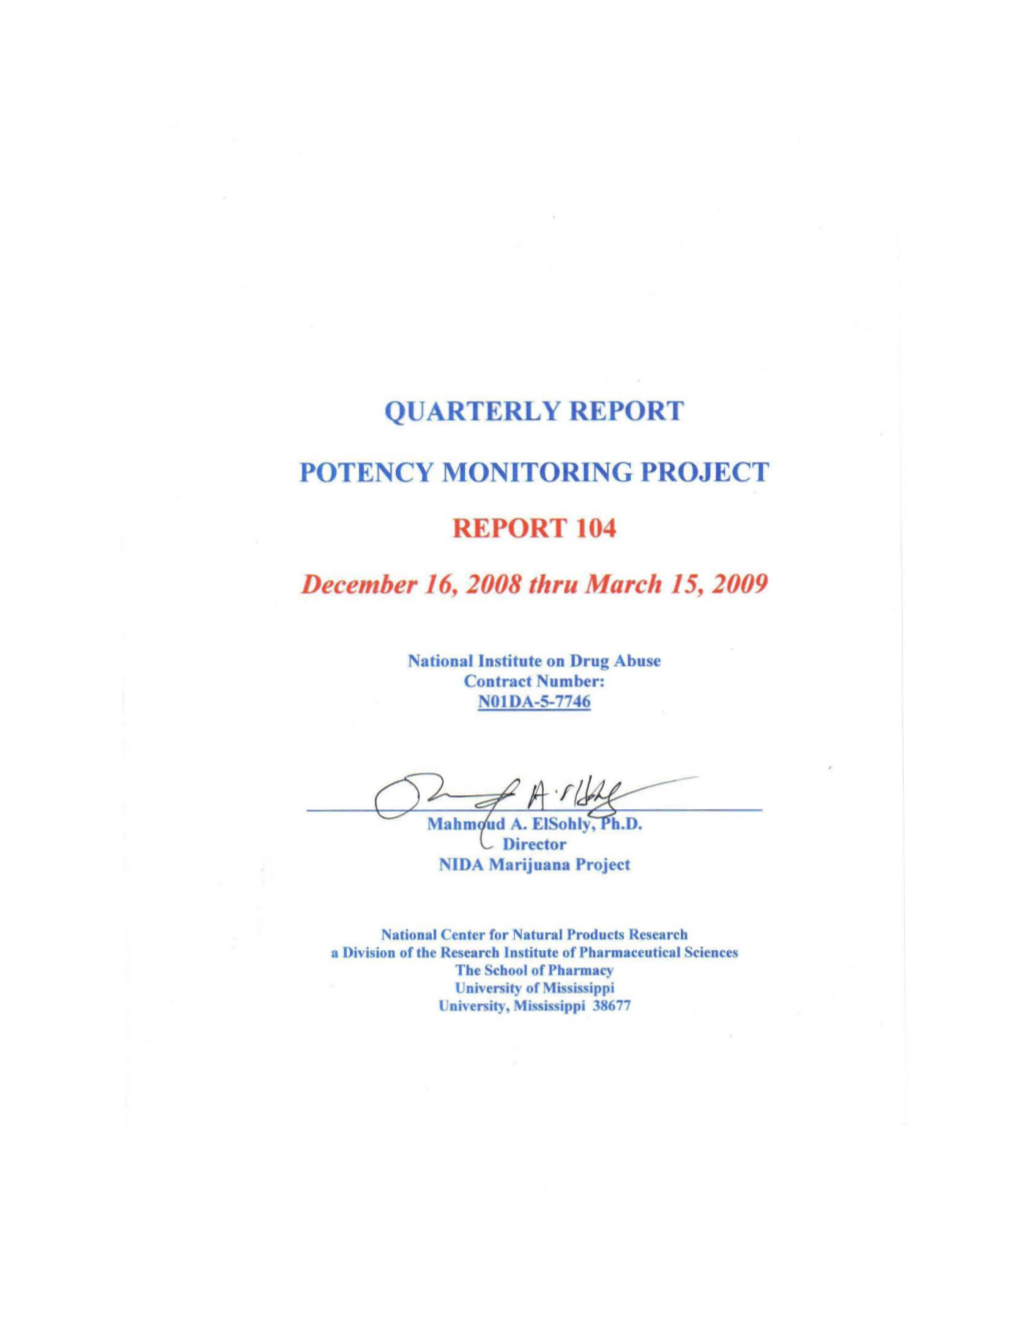 Quarterly Report Potency Monitoring Project Report